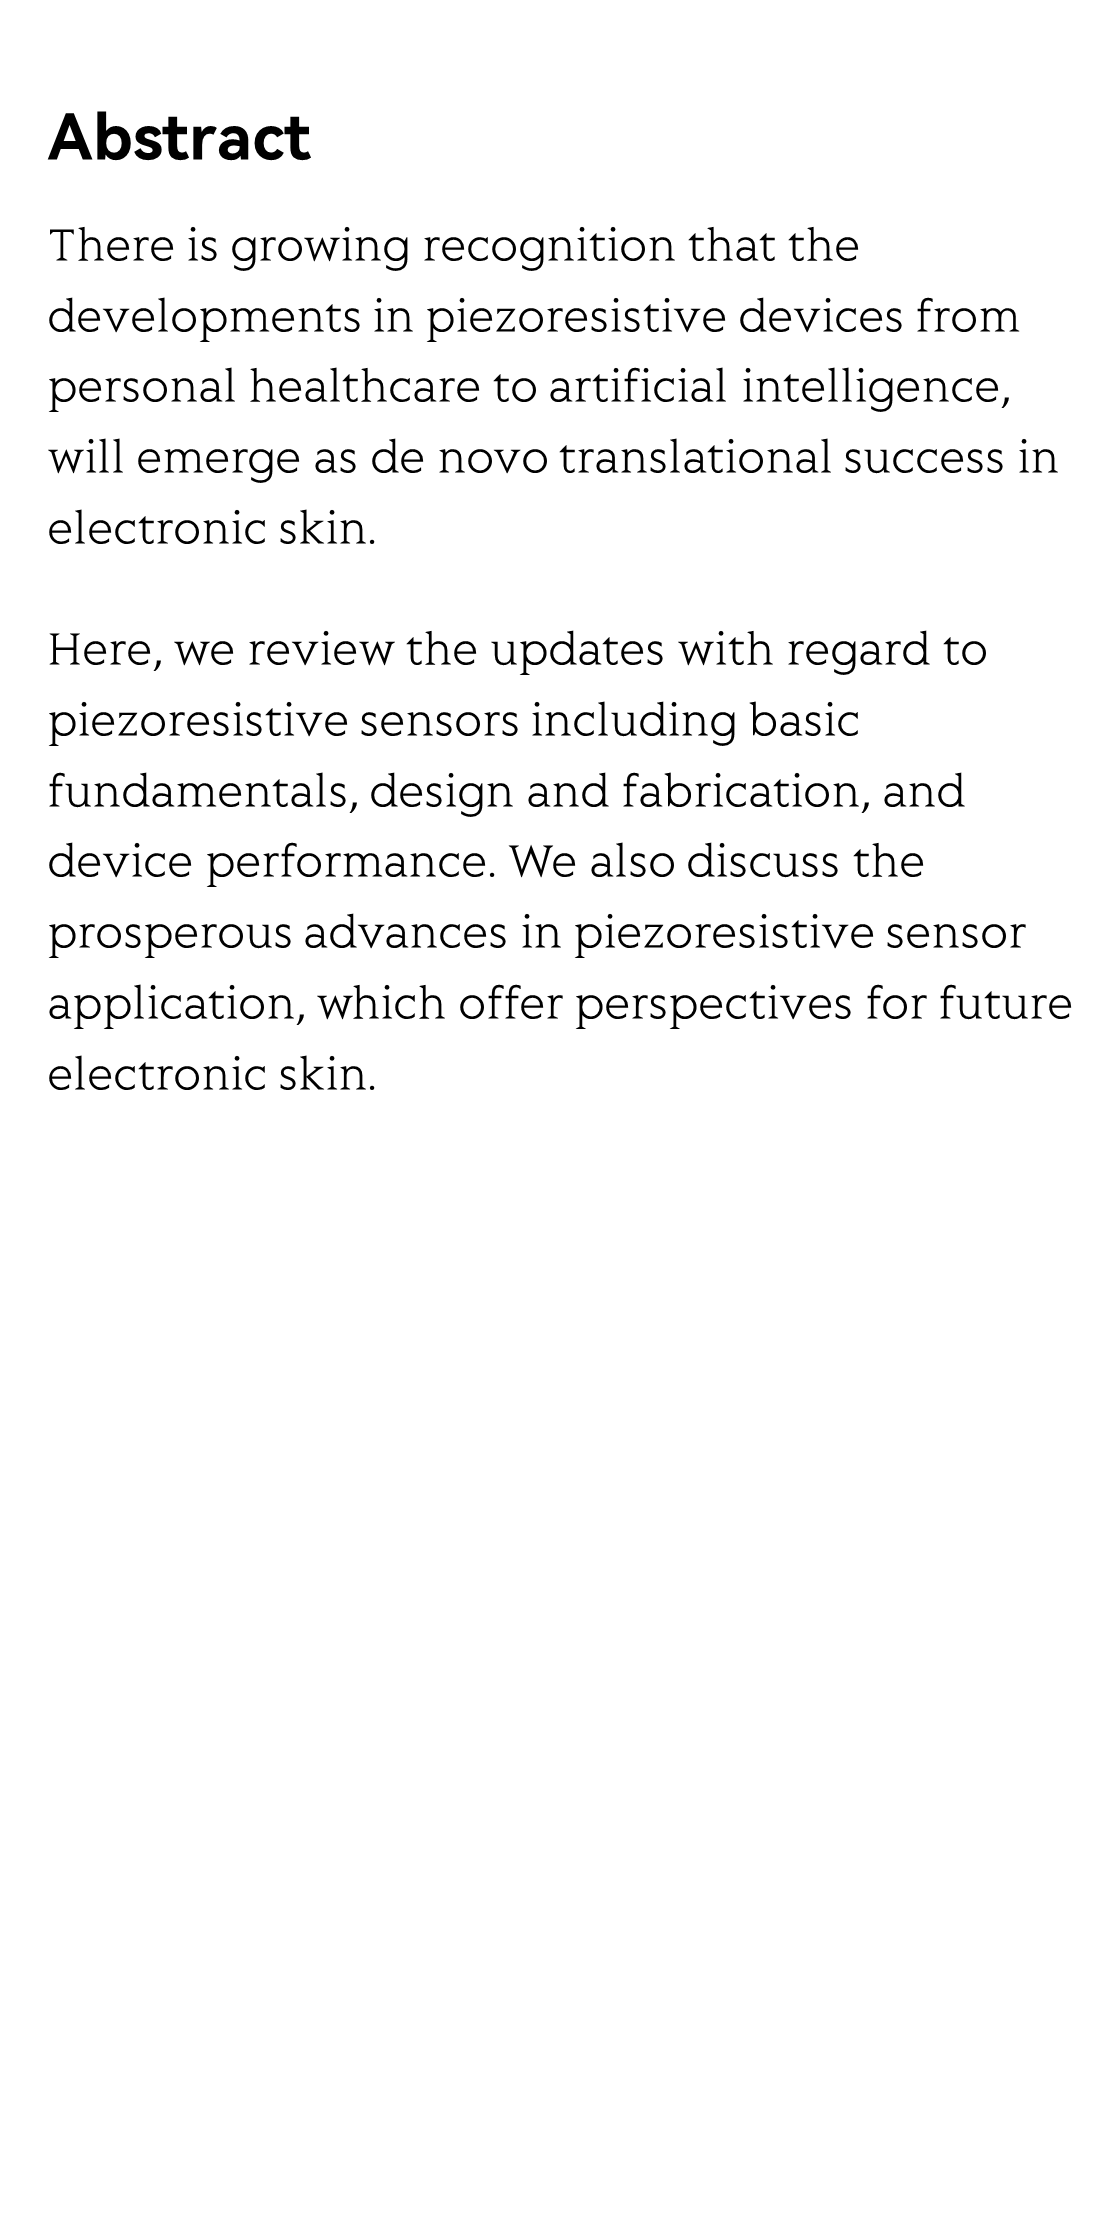 Piezoresistive design for electronic skin: from fundamental to emerging applications_2